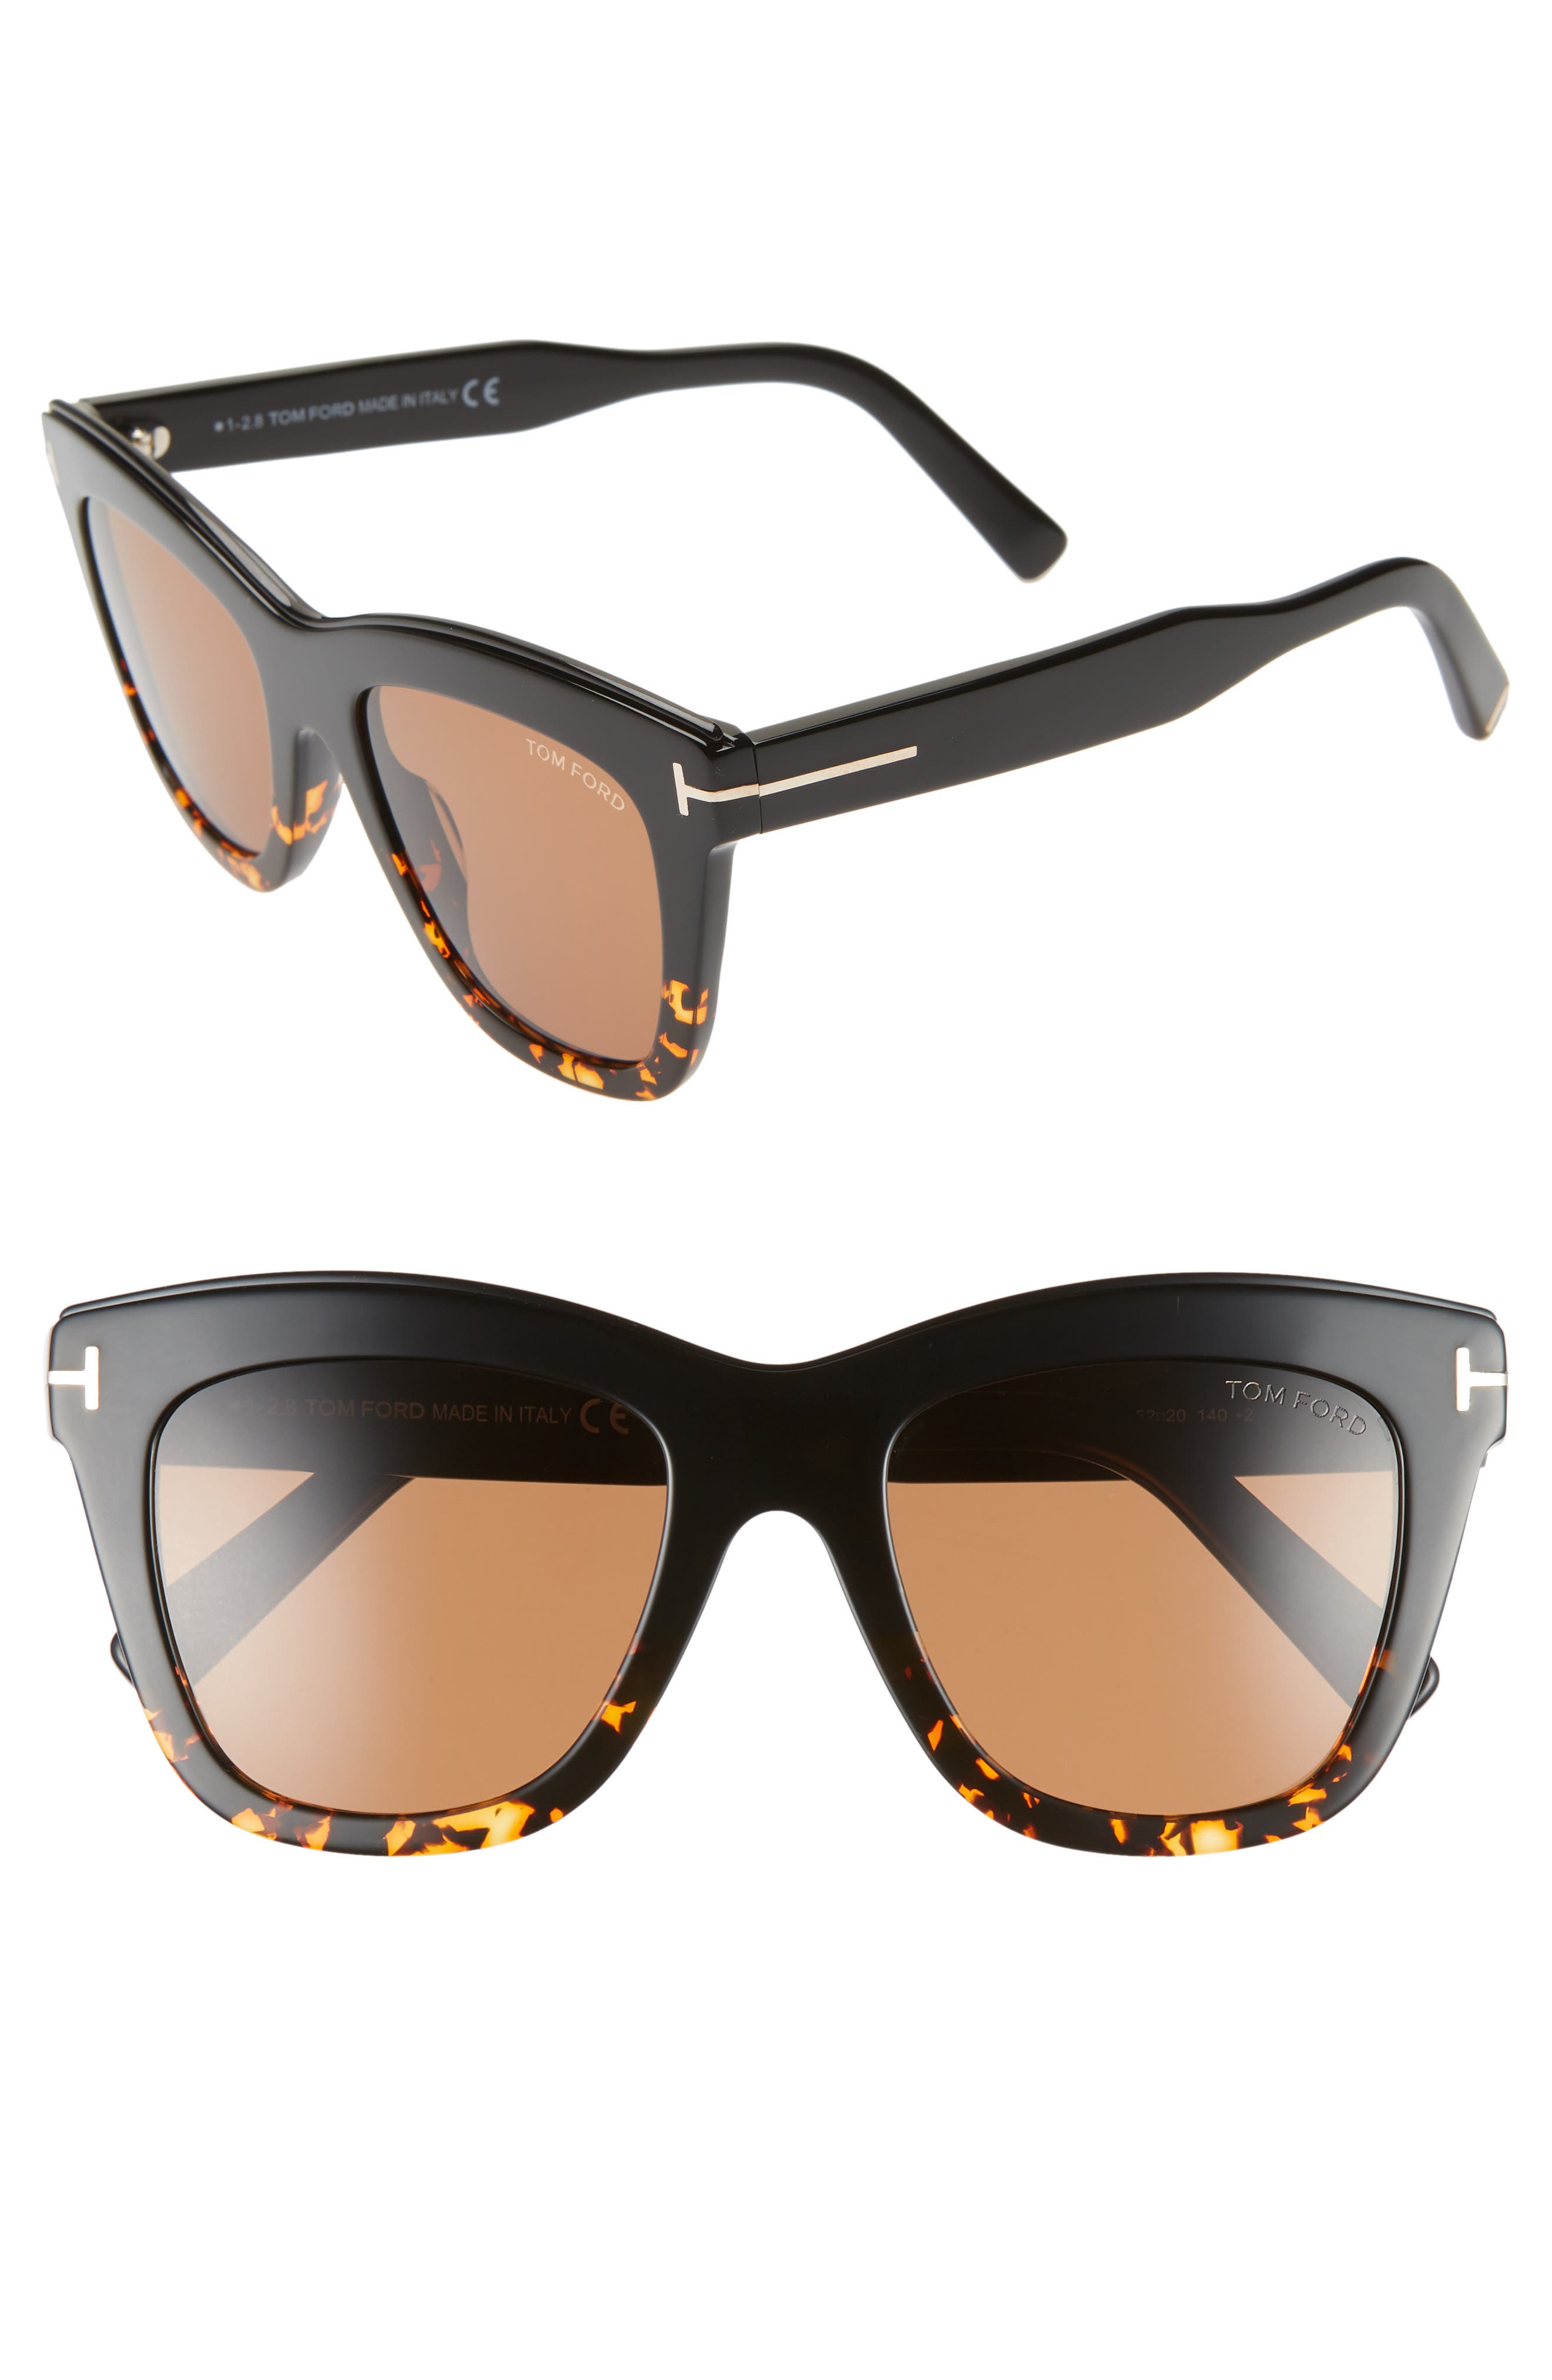 Tom Ford Sunglasses New Collection Store, 58% OFF 